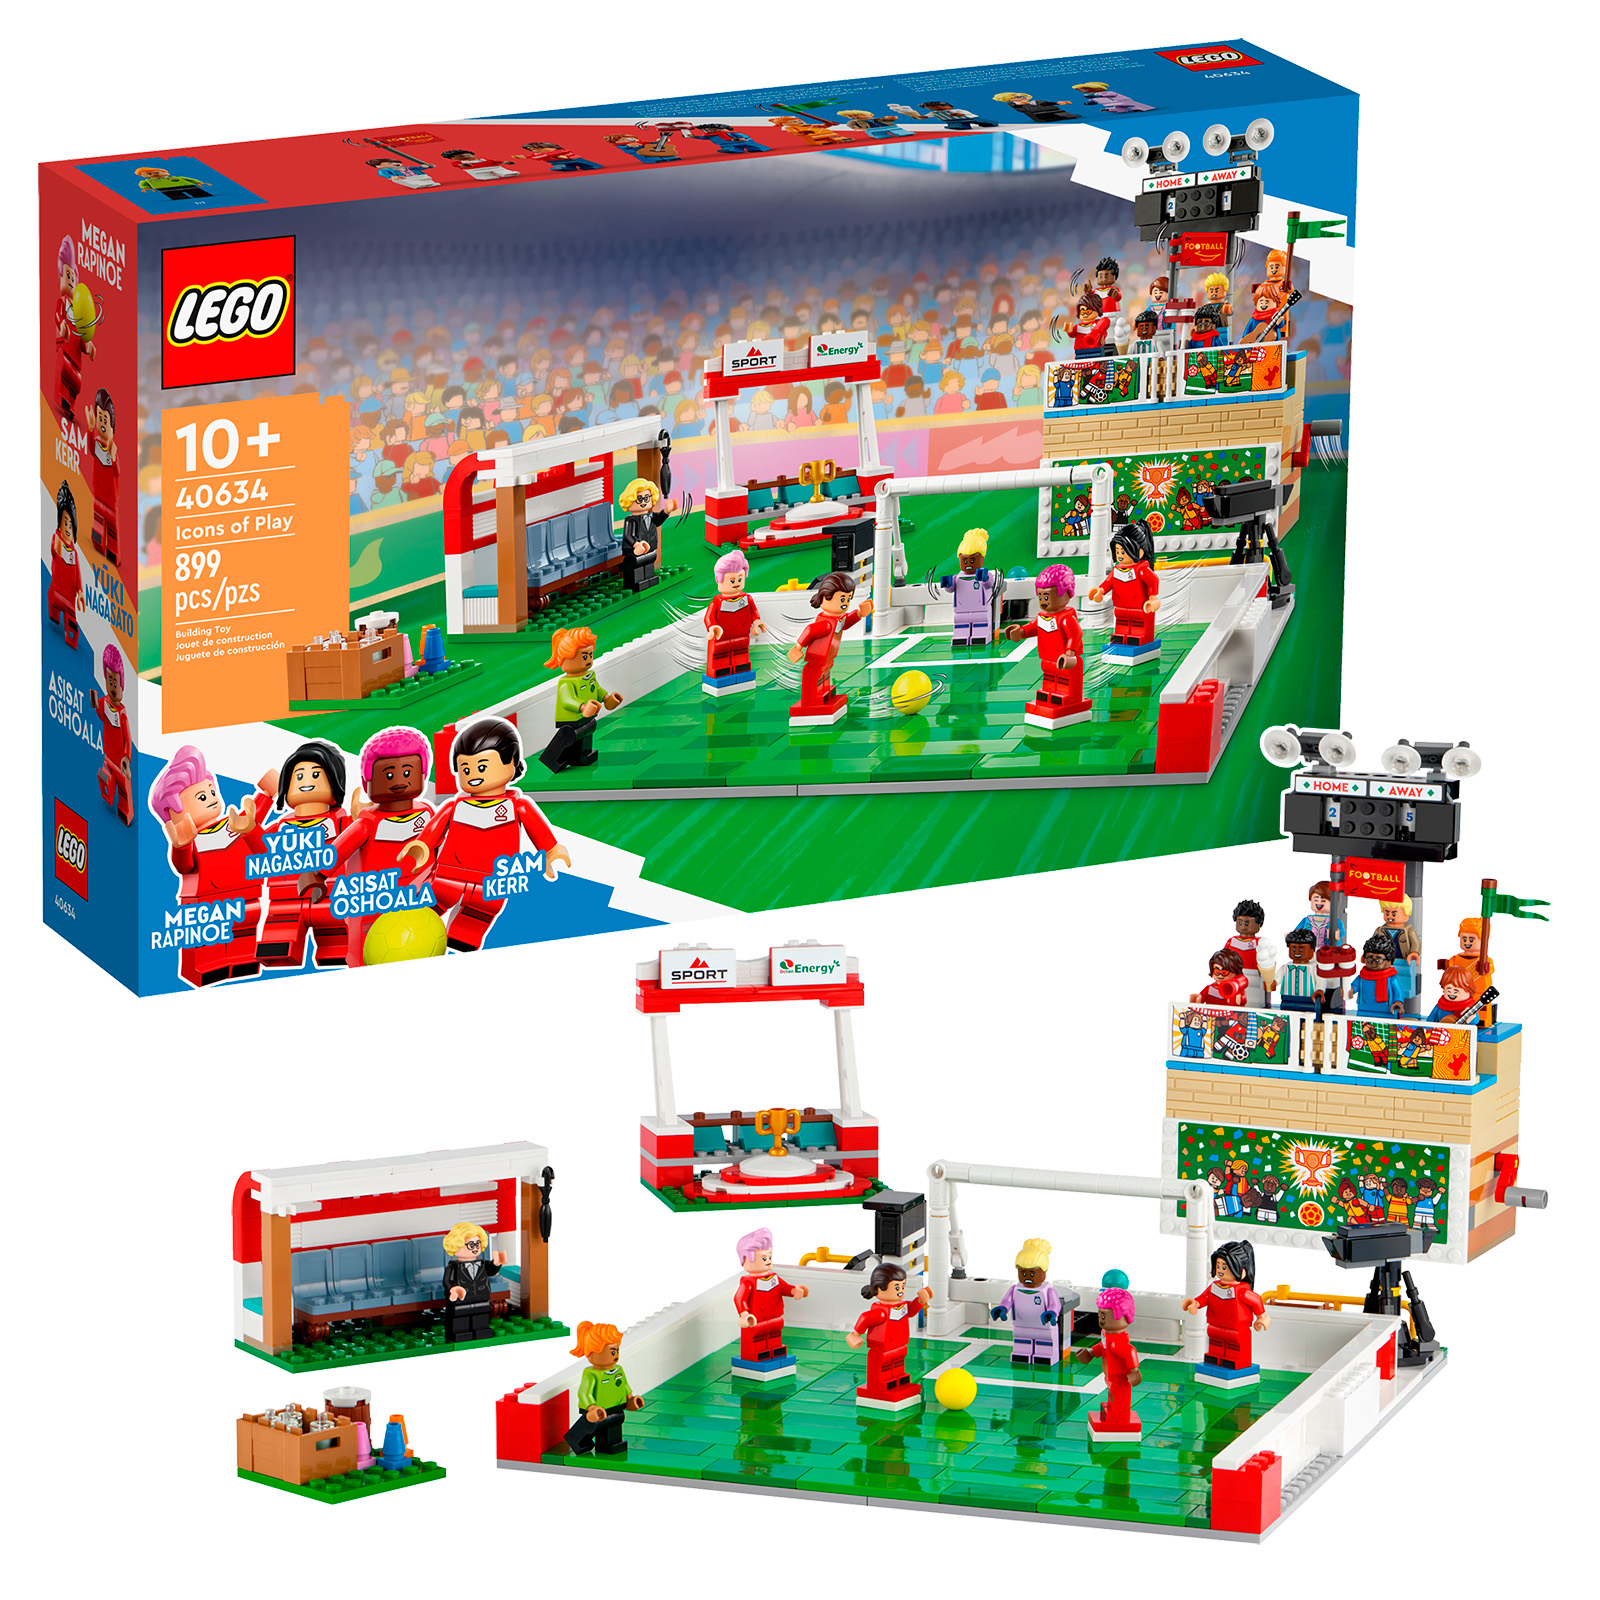 Does the LEGO Group want the football market or not?